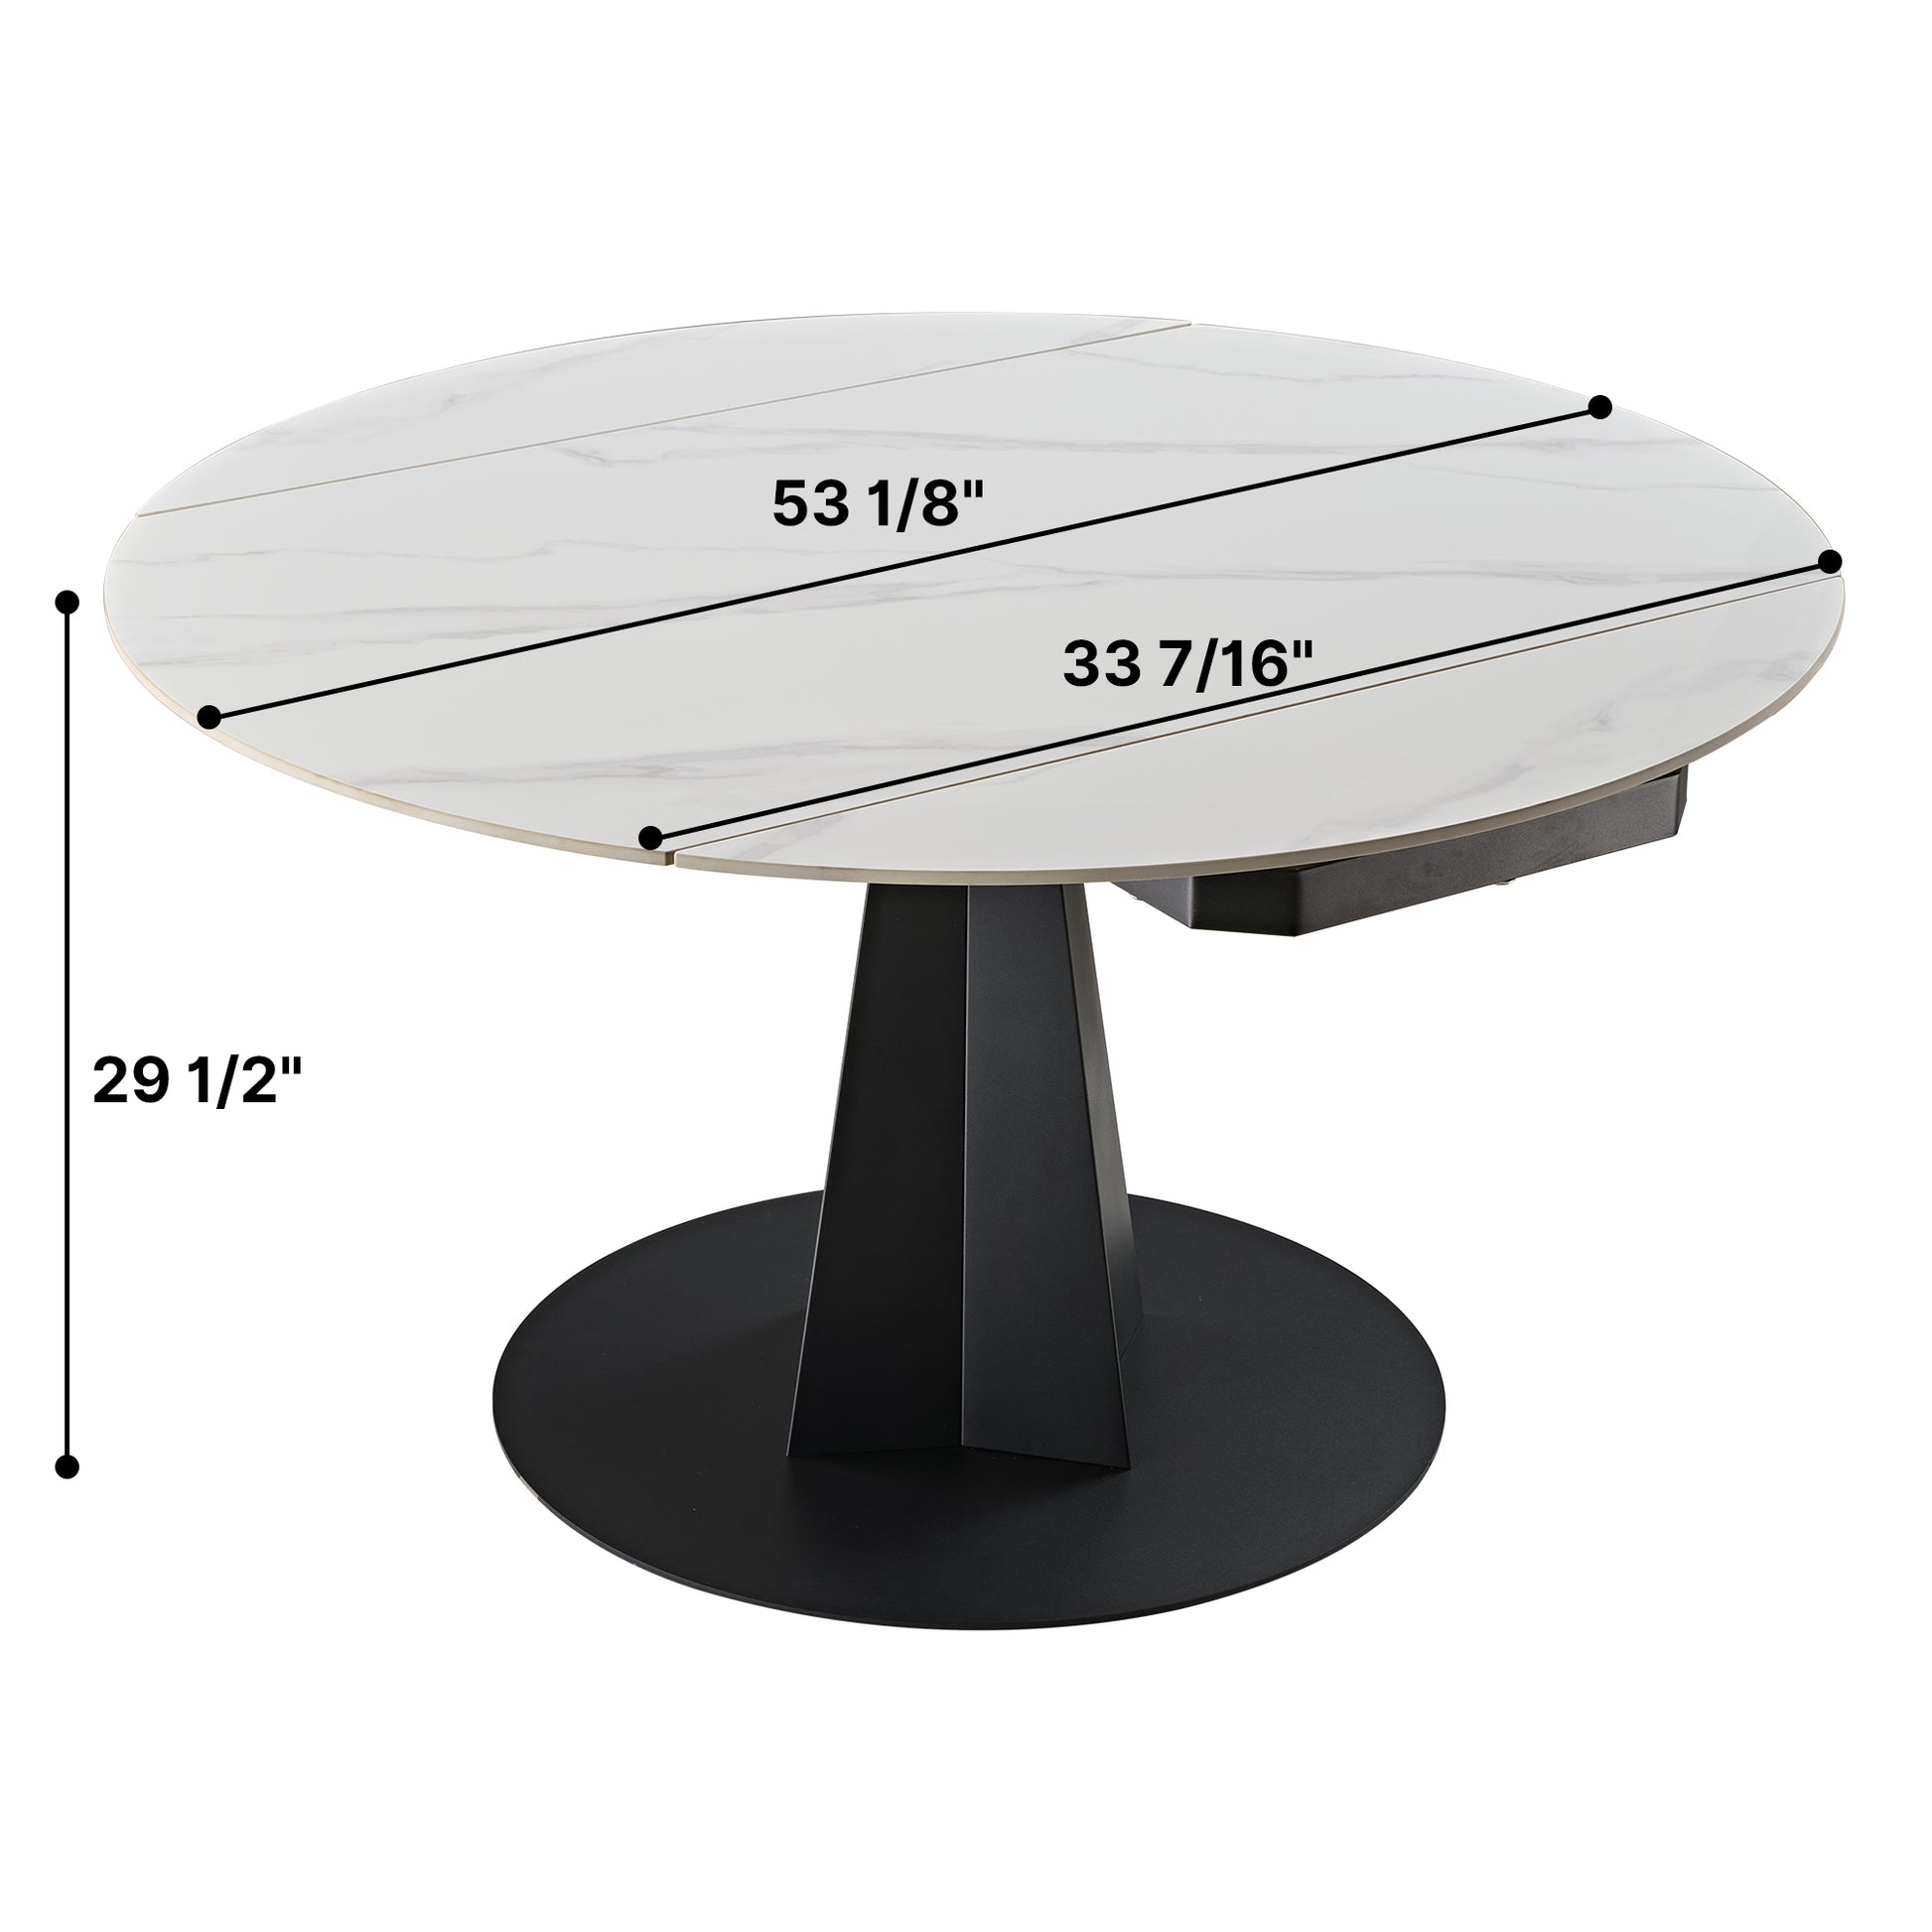 53 inch White Round Extending Dining Table with Black Base, Product Dimensions